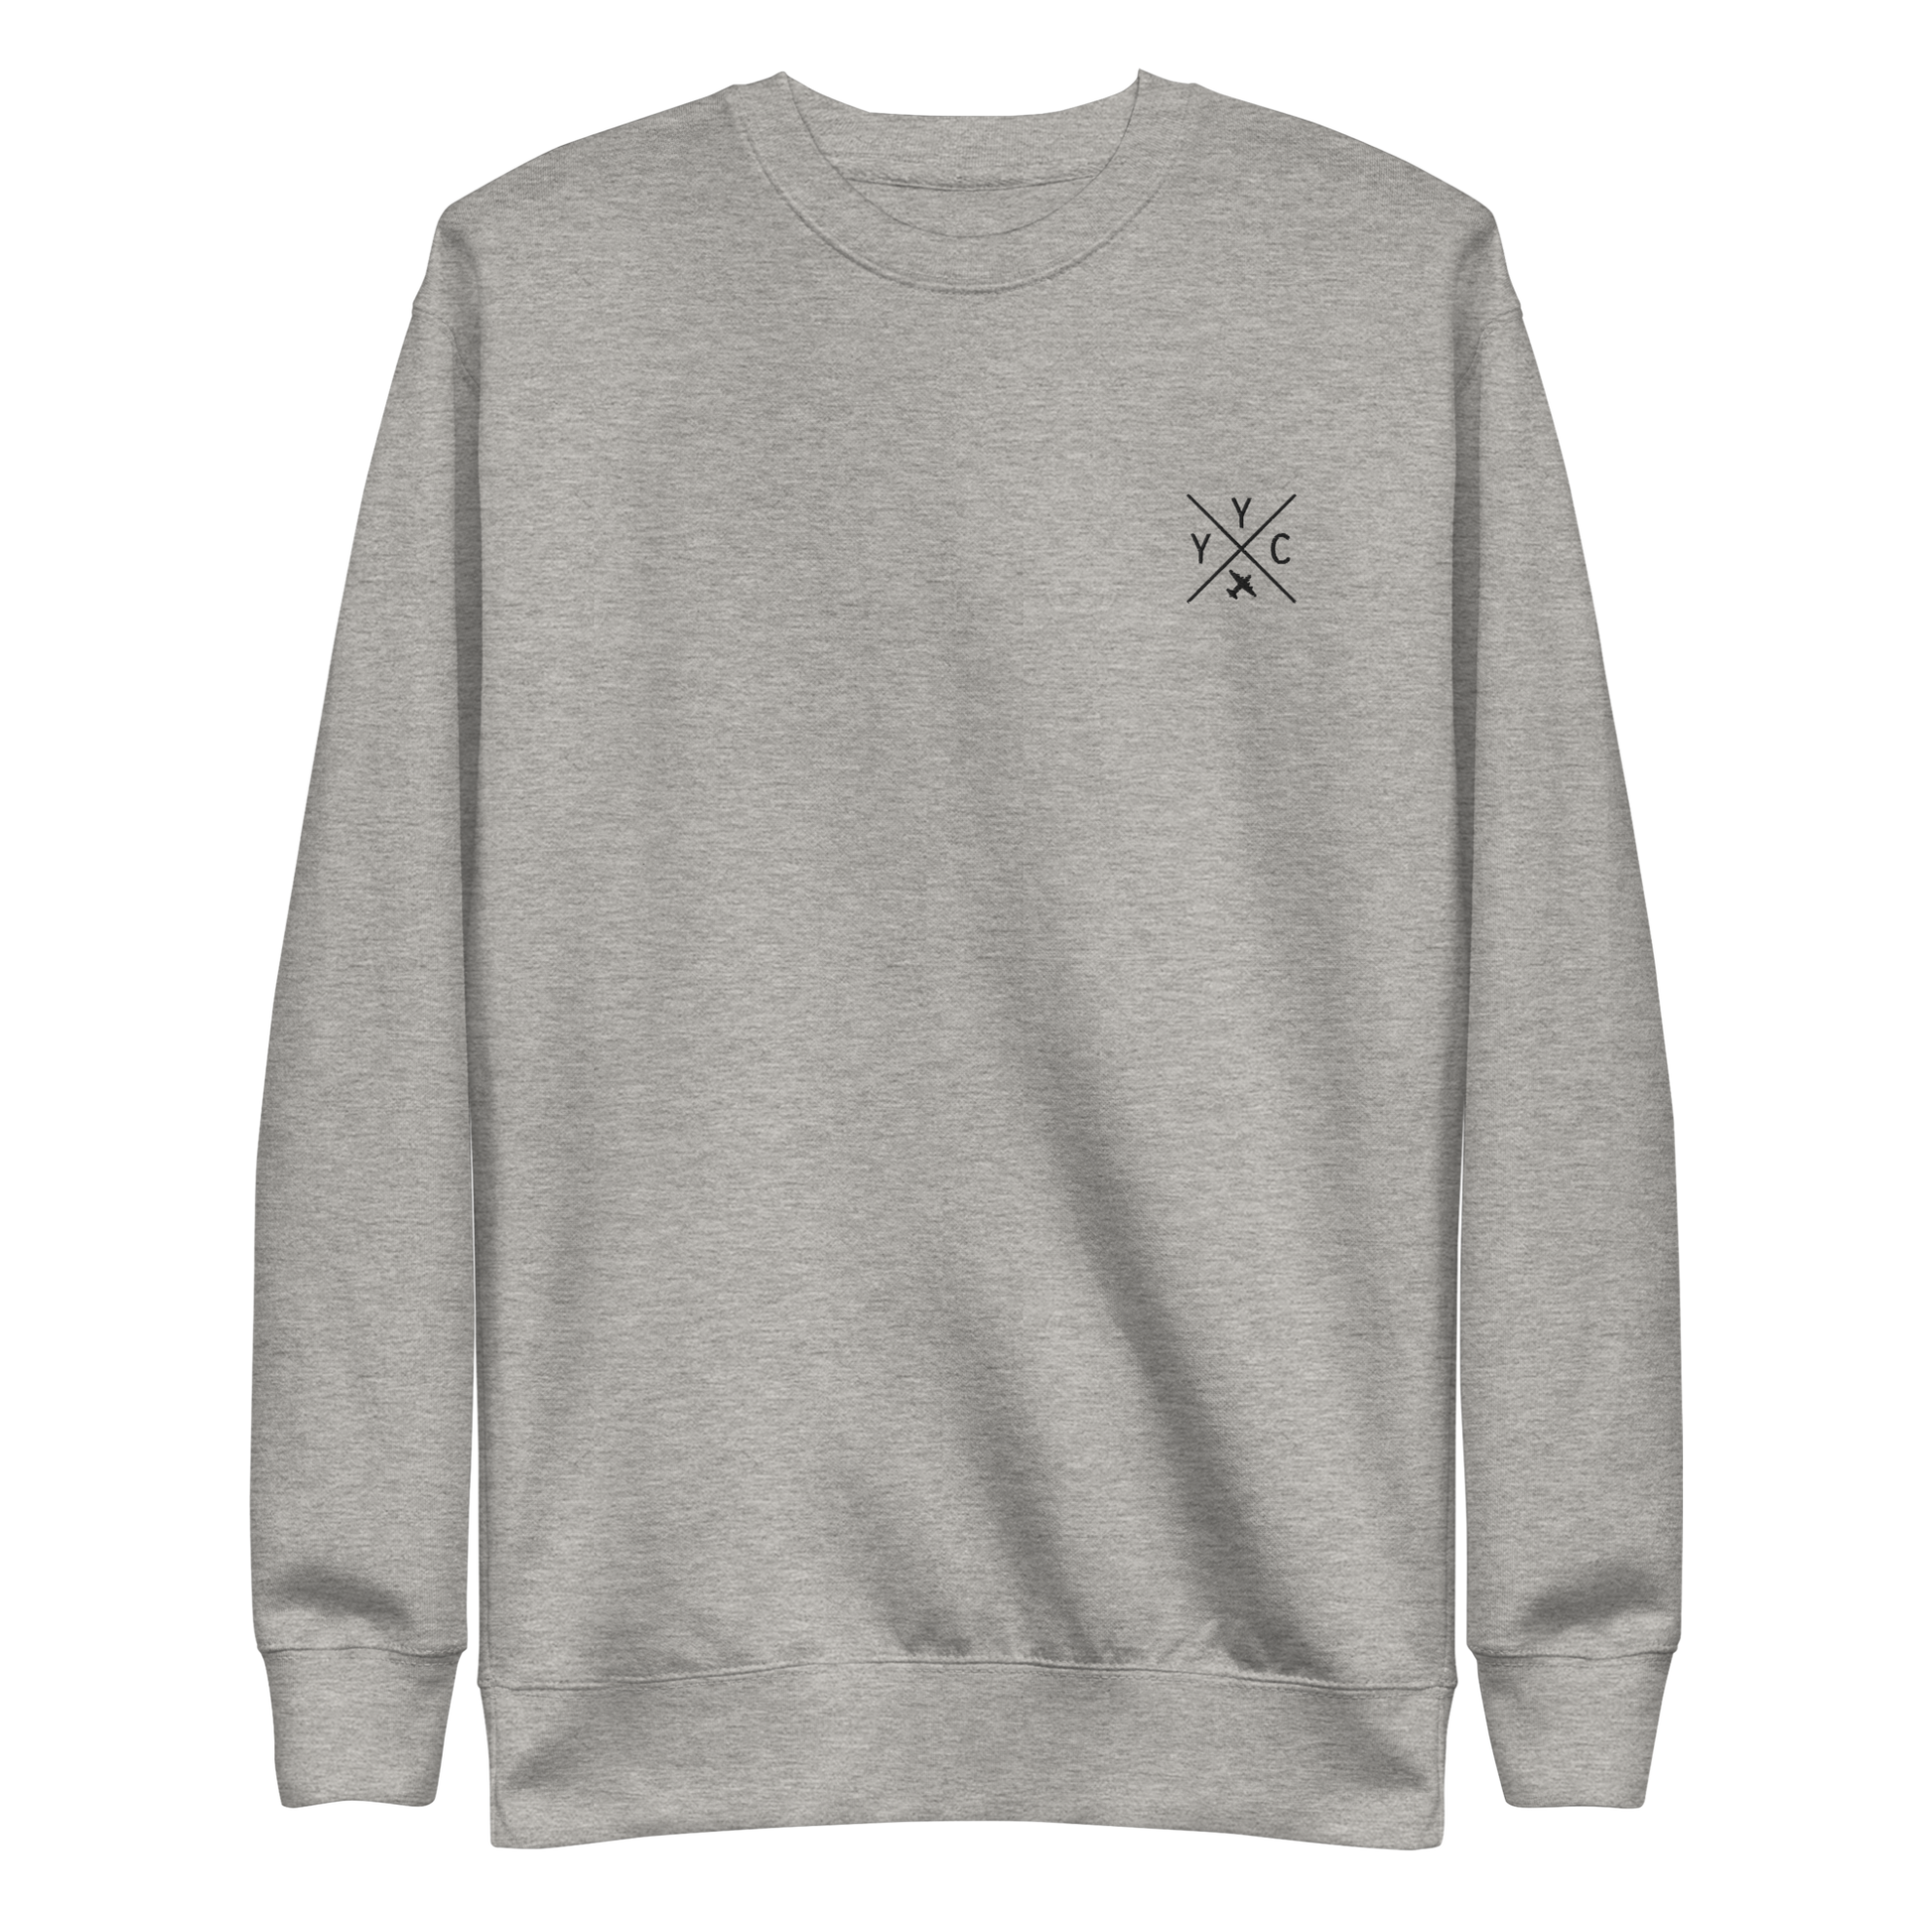 YHM Designs - YYC Calgary Premium Sweatshirt - Crossed-X Design with Airport Code and Vintage Propliner - Black Embroidery - Image 02